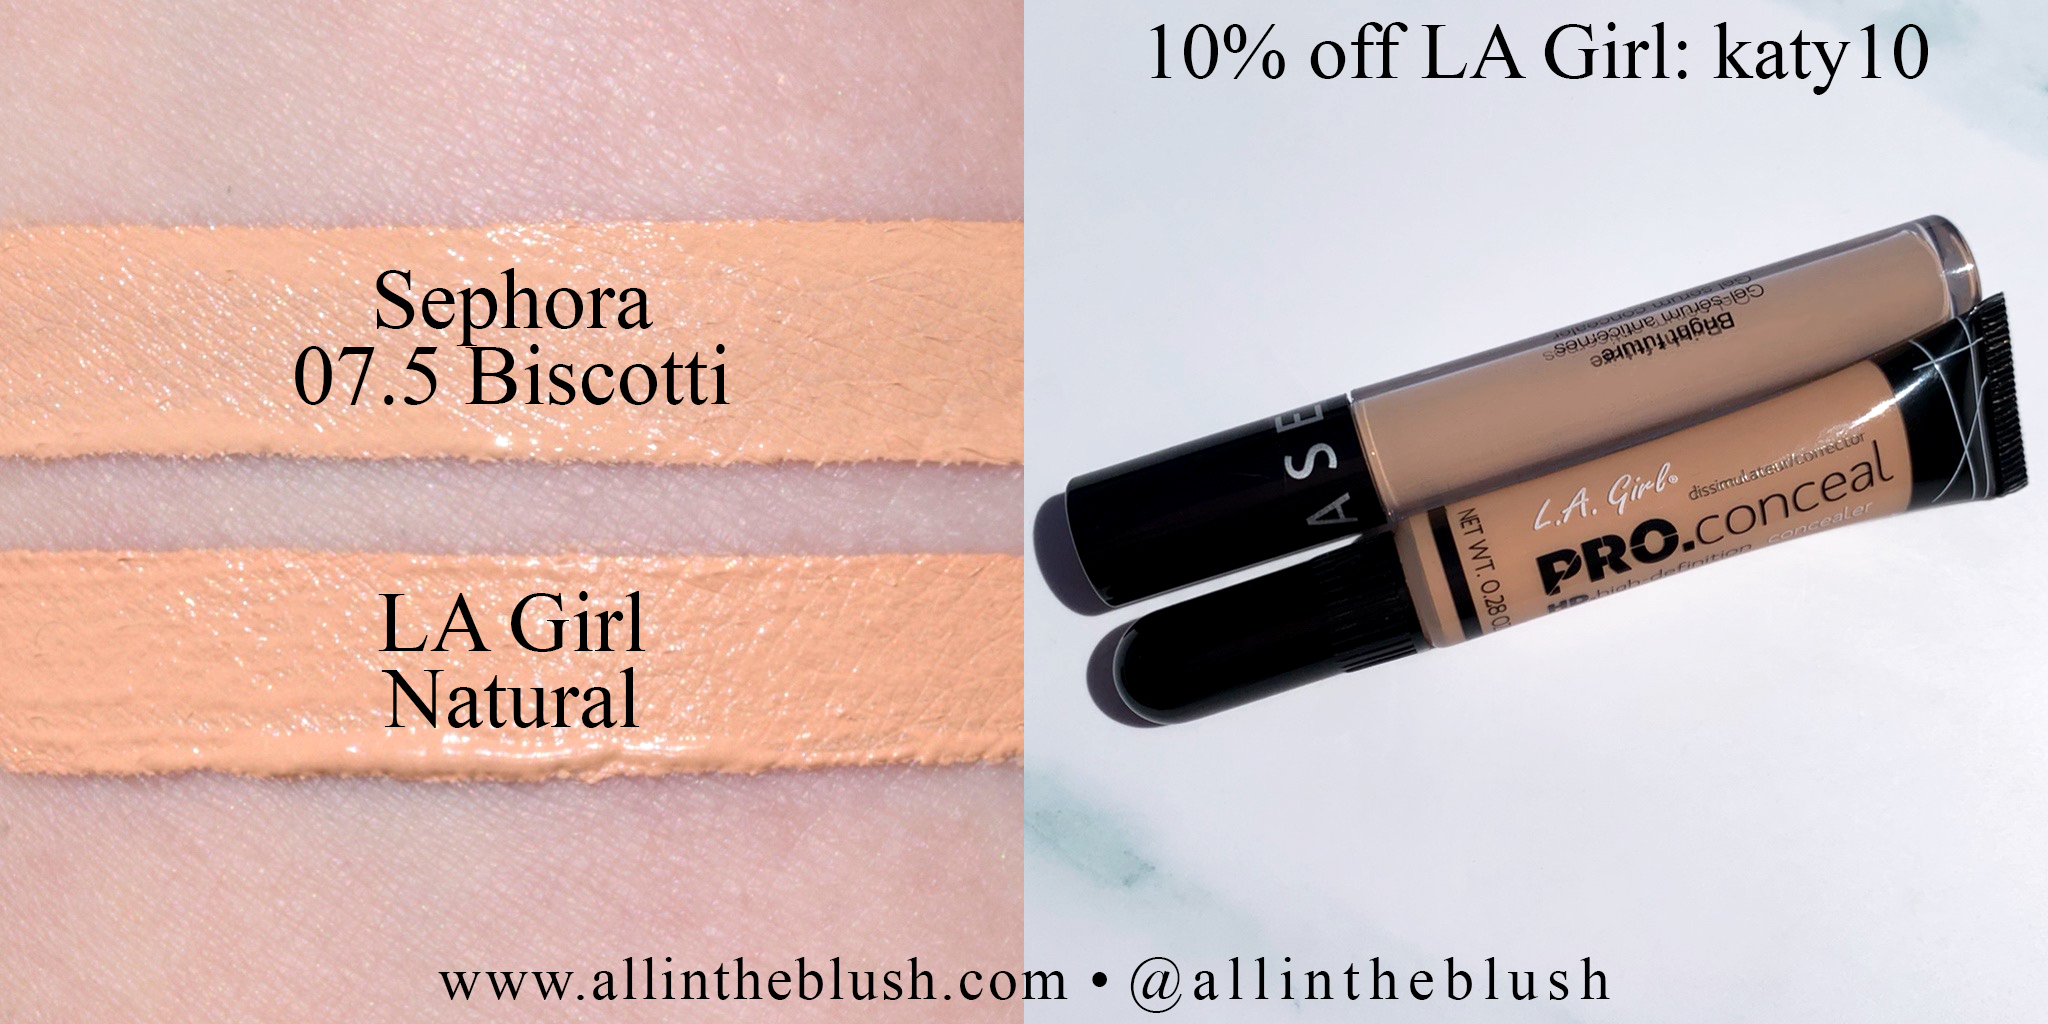 Swatch - LA Girl HD Pro.Conceal Natural and Sephora 07.5 Biscotti Bright